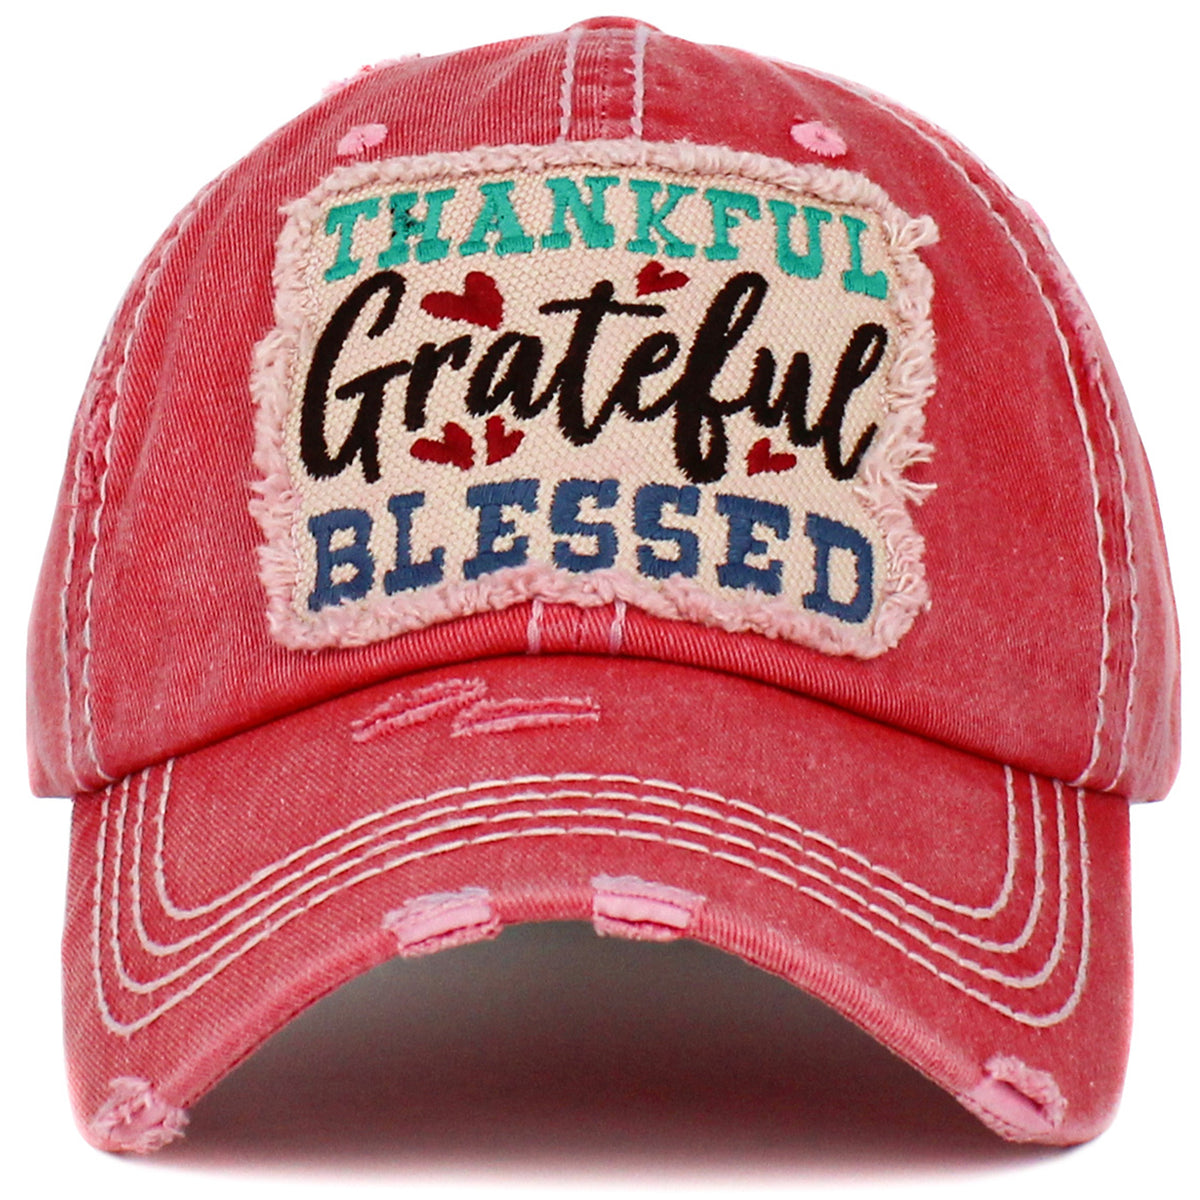 1445 - Thankful Grateful Blessed Hat - Hot Pink